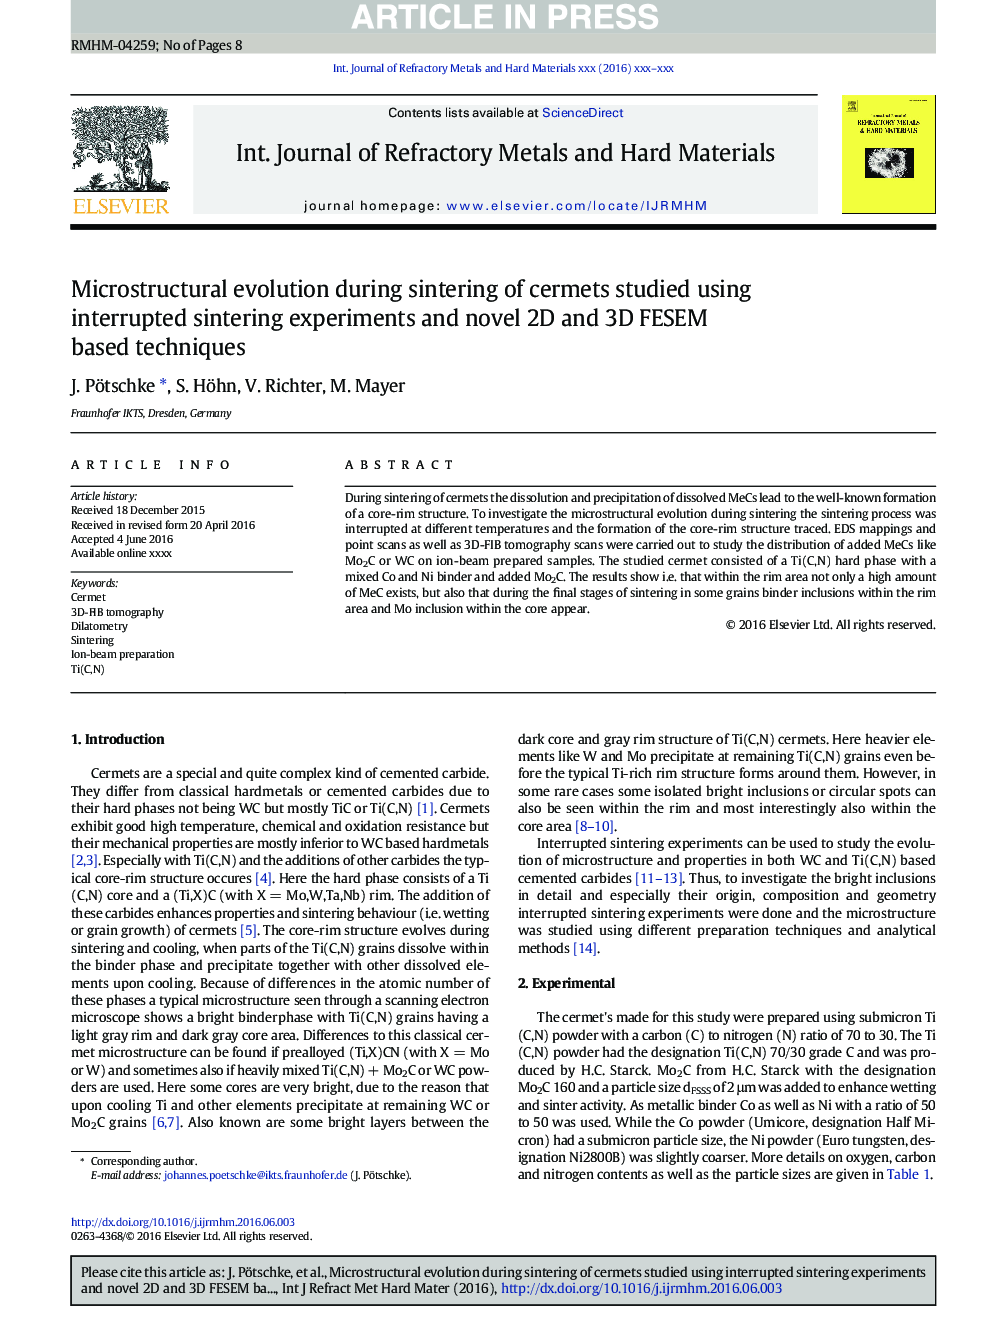 Microstructural evolution during sintering of cermets studied using interrupted sintering experiments and novel 2D and 3D FESEM based techniques